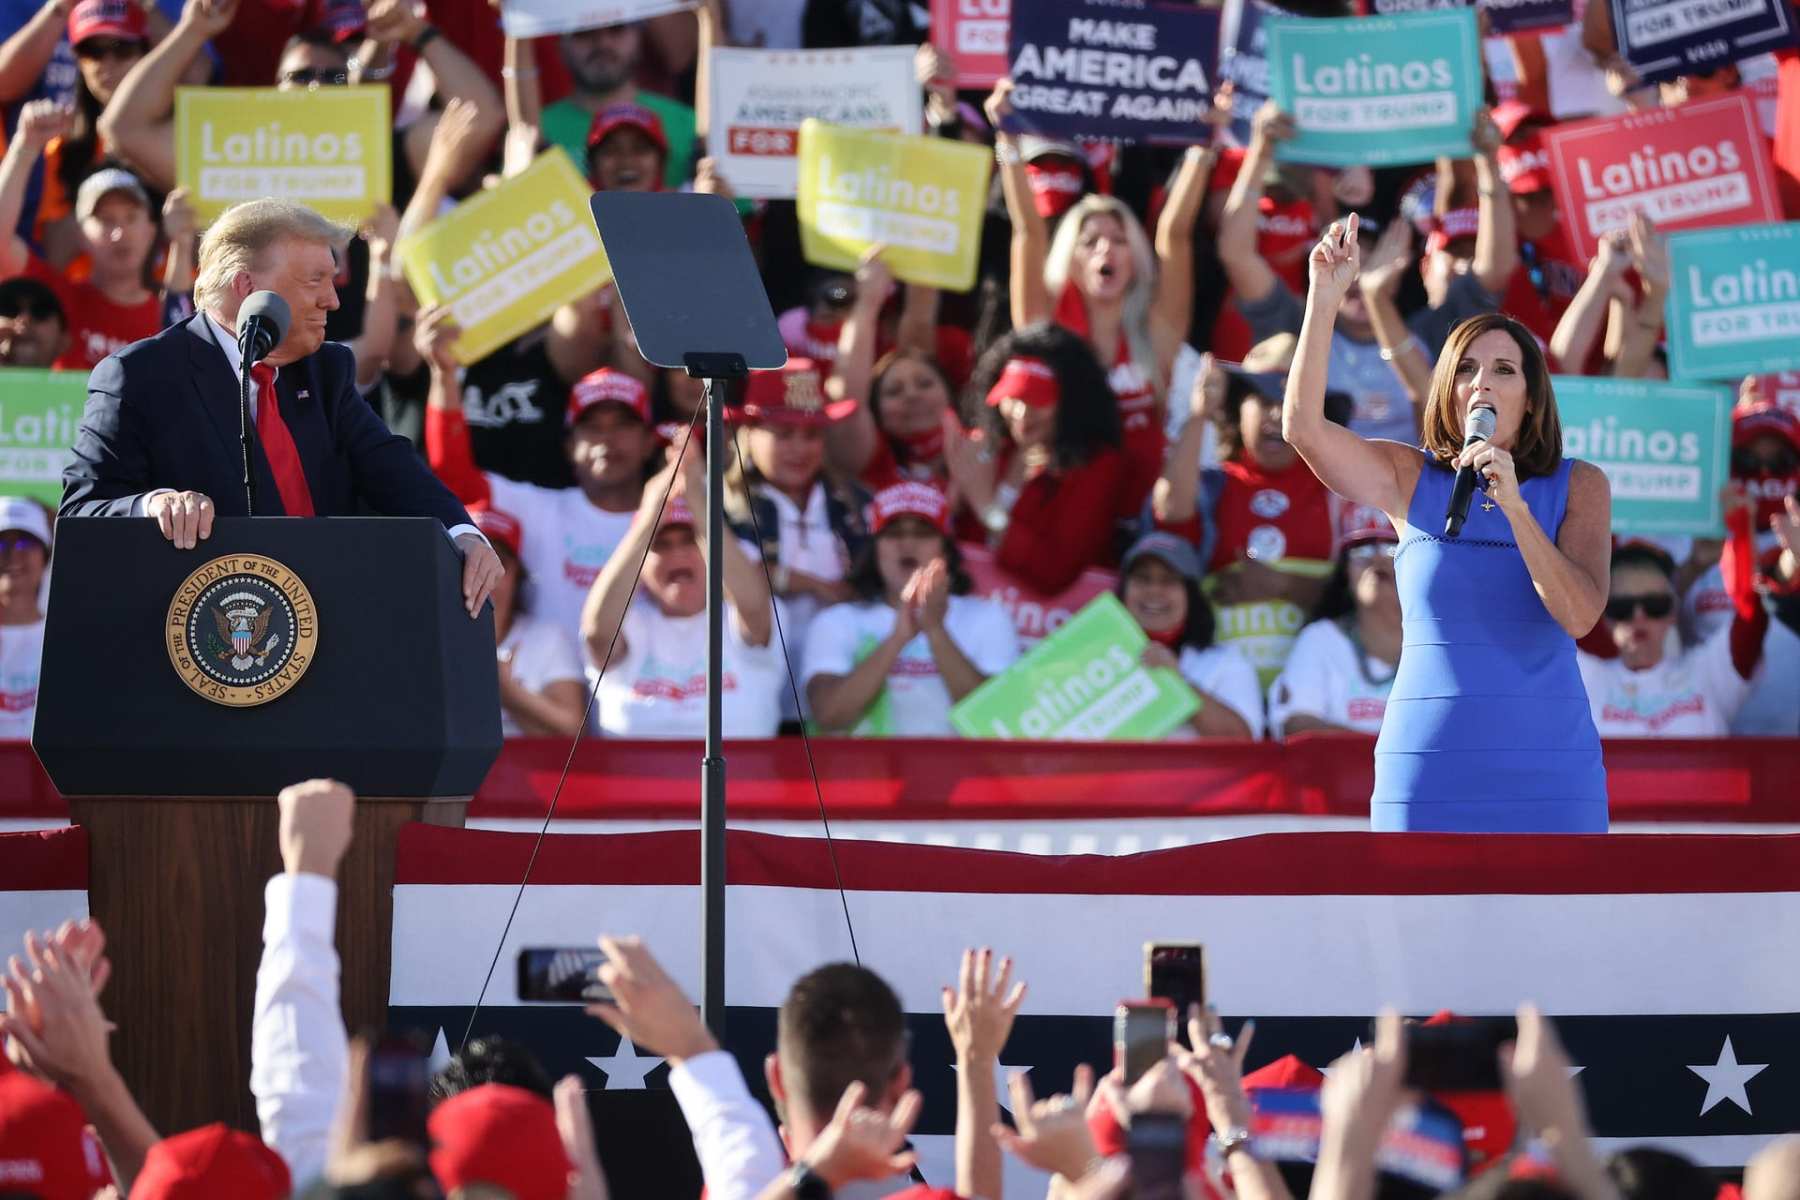 GOODYEAR, ARIZONA - OCTOBER 28: Sen. Martha McSally (R-AZ) (R) praises U.S. President Donald Trump during a campaign rally at Phoenix Goodyear Airport October 28, 2020 in Goodyear, Arizona. With less than a week until Election Day, Trump and his opponent, Democratic presidential nominee Joe Biden, are campaigning across the country. (Photo by Chip Somodevilla/Getty Images)